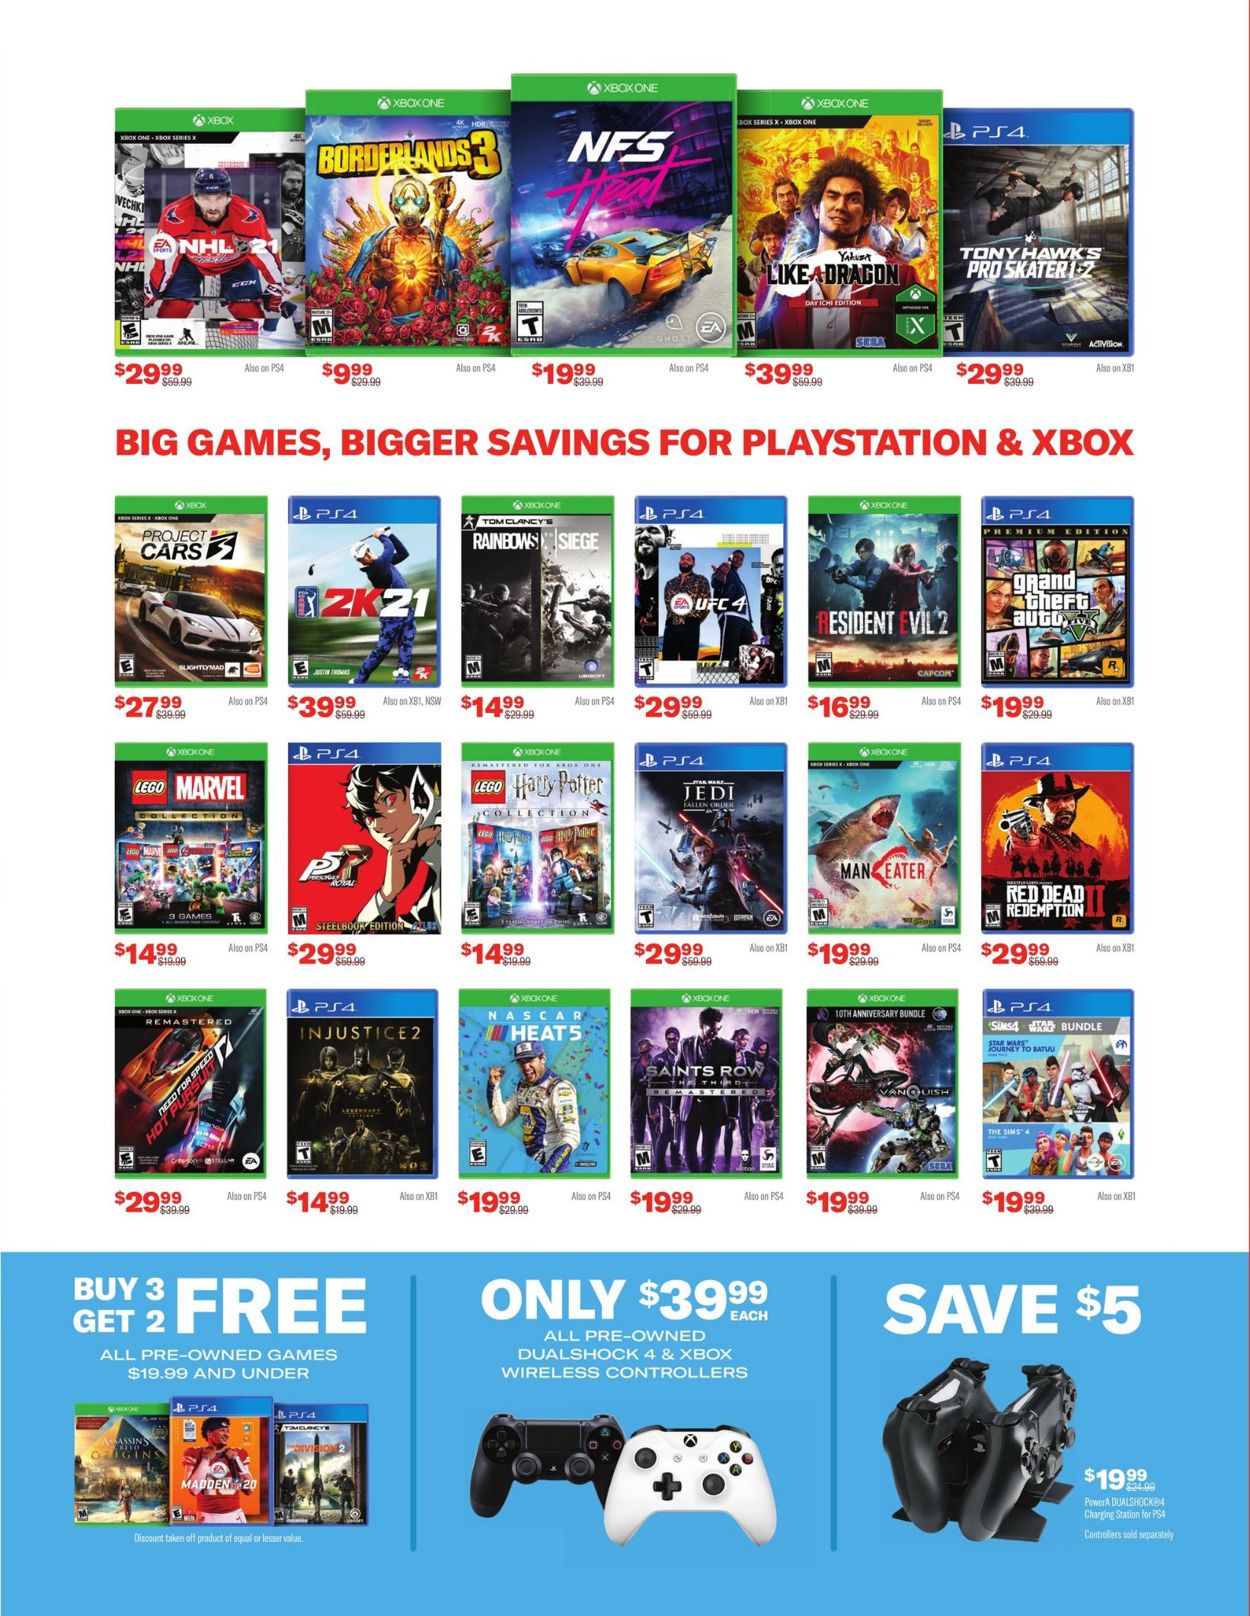 Catalogue Game Stop Holiday Sale 2020 from 12/20/2020